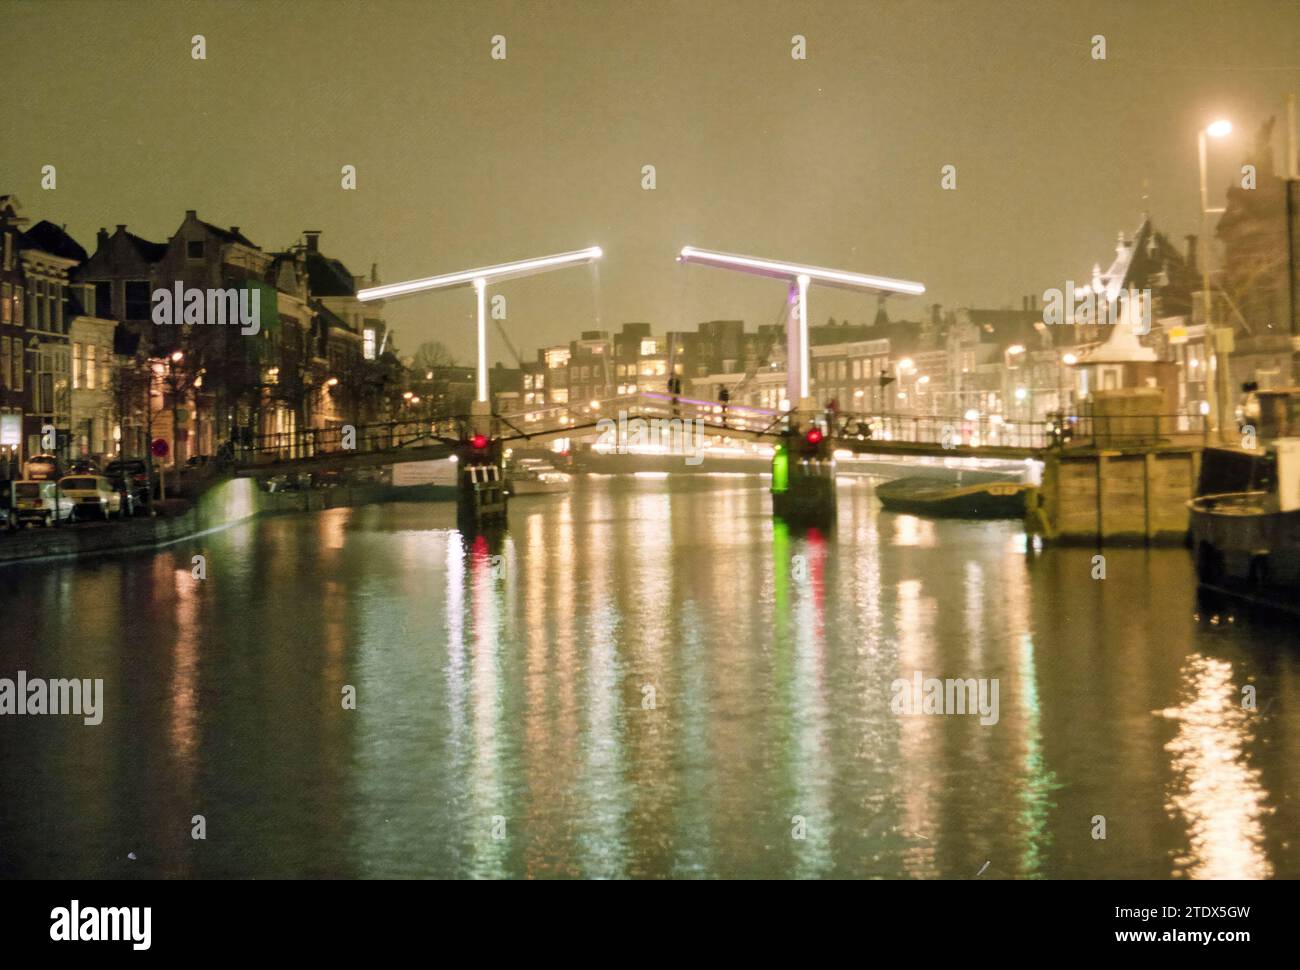 Lighting Gravesteen Bridge, H'lem, Haarlem, The Netherlands, 17-12-1998, Whizgle News from the Past, Tailored for the Future. Explore historical narratives, Dutch The Netherlands agency image with a modern perspective, bridging the gap between yesterday's events and tomorrow's insights. A timeless journey shaping the stories that shape our future. Stock Photo